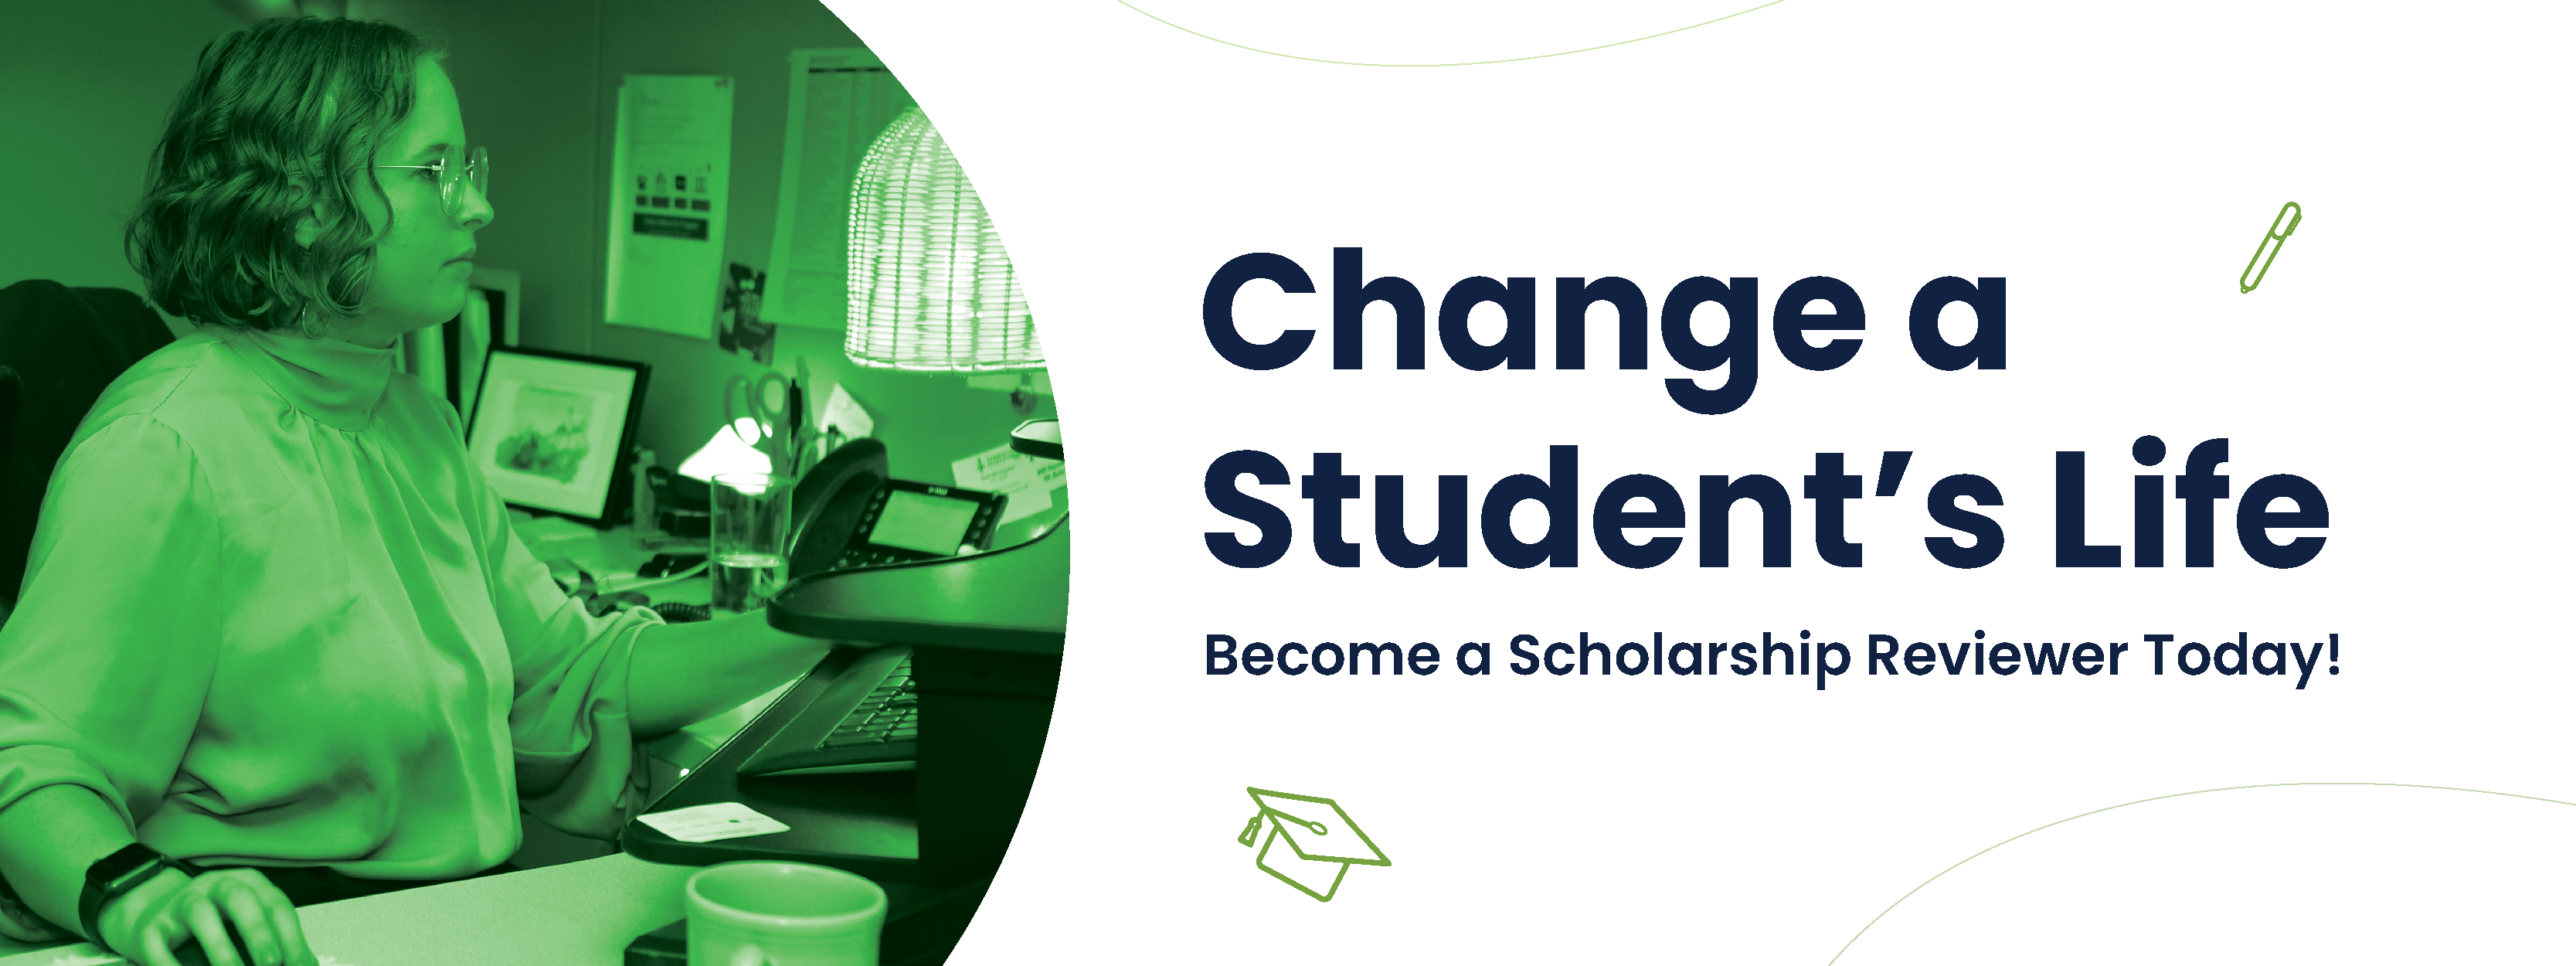 Pictured: A woman with curly short hair at her desk reviewing scholarship applications. Caption on graphic: Change a Student's Life! Become a Scholarship Reviewer today. 